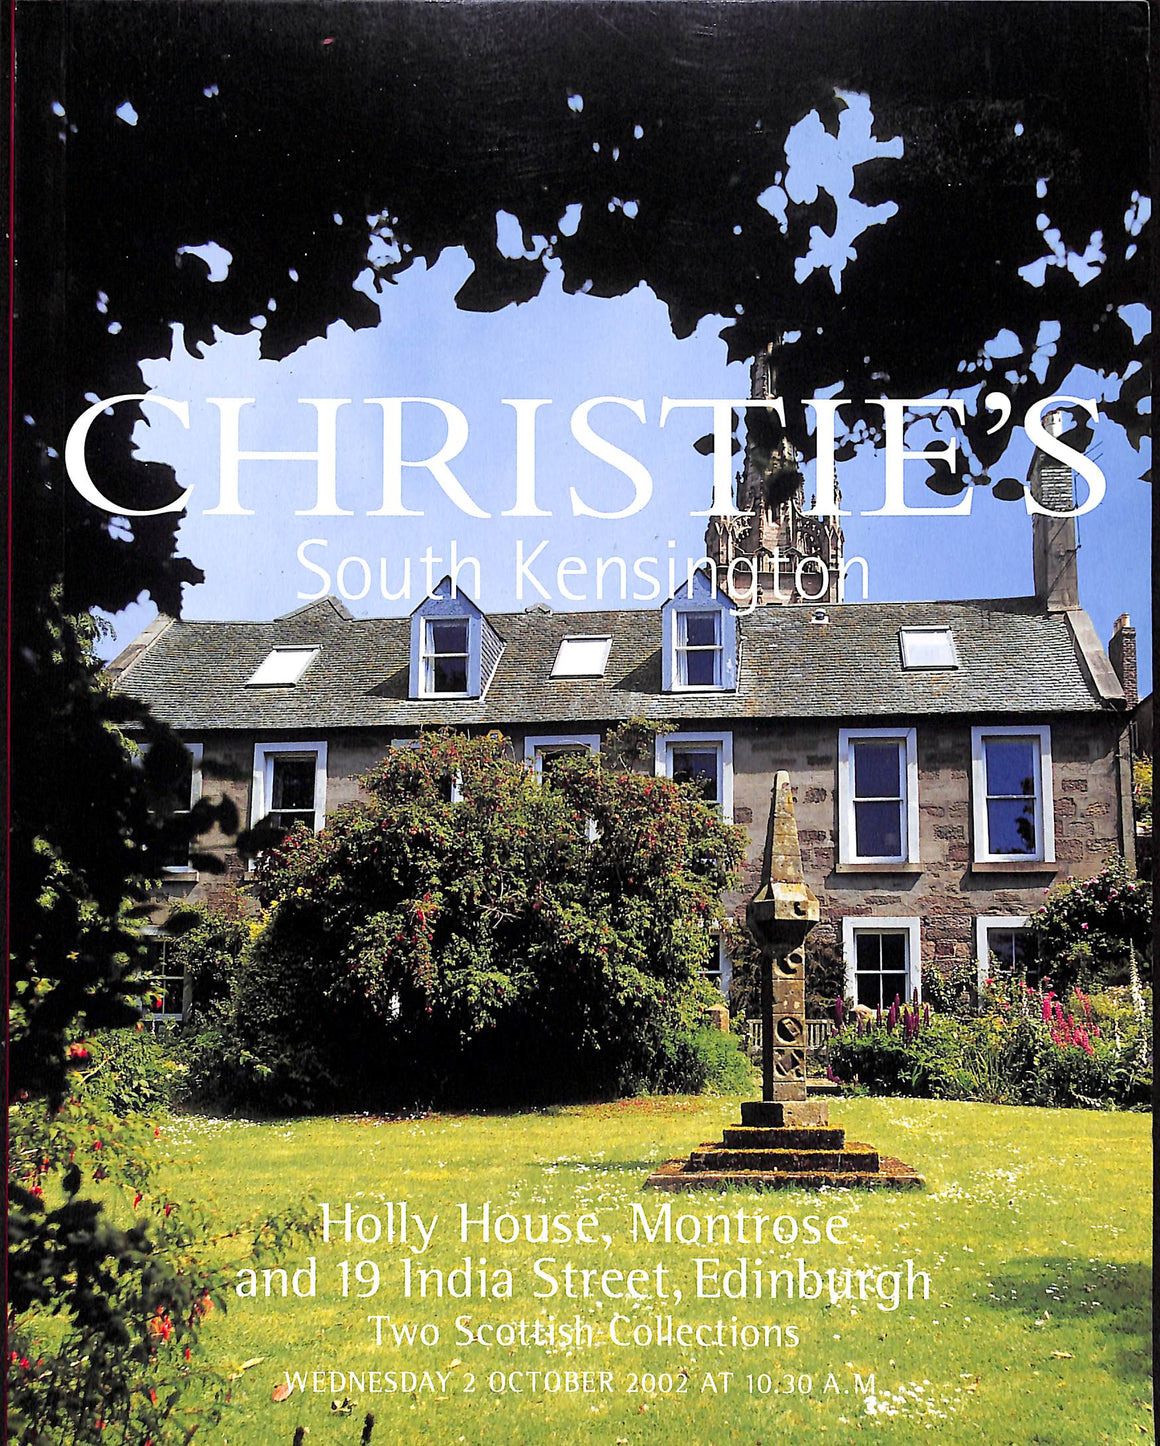 Holly House, Montrose And 19 India Street, Edinburgh Two Scottish Collections- 2002 Christie's South Kensington